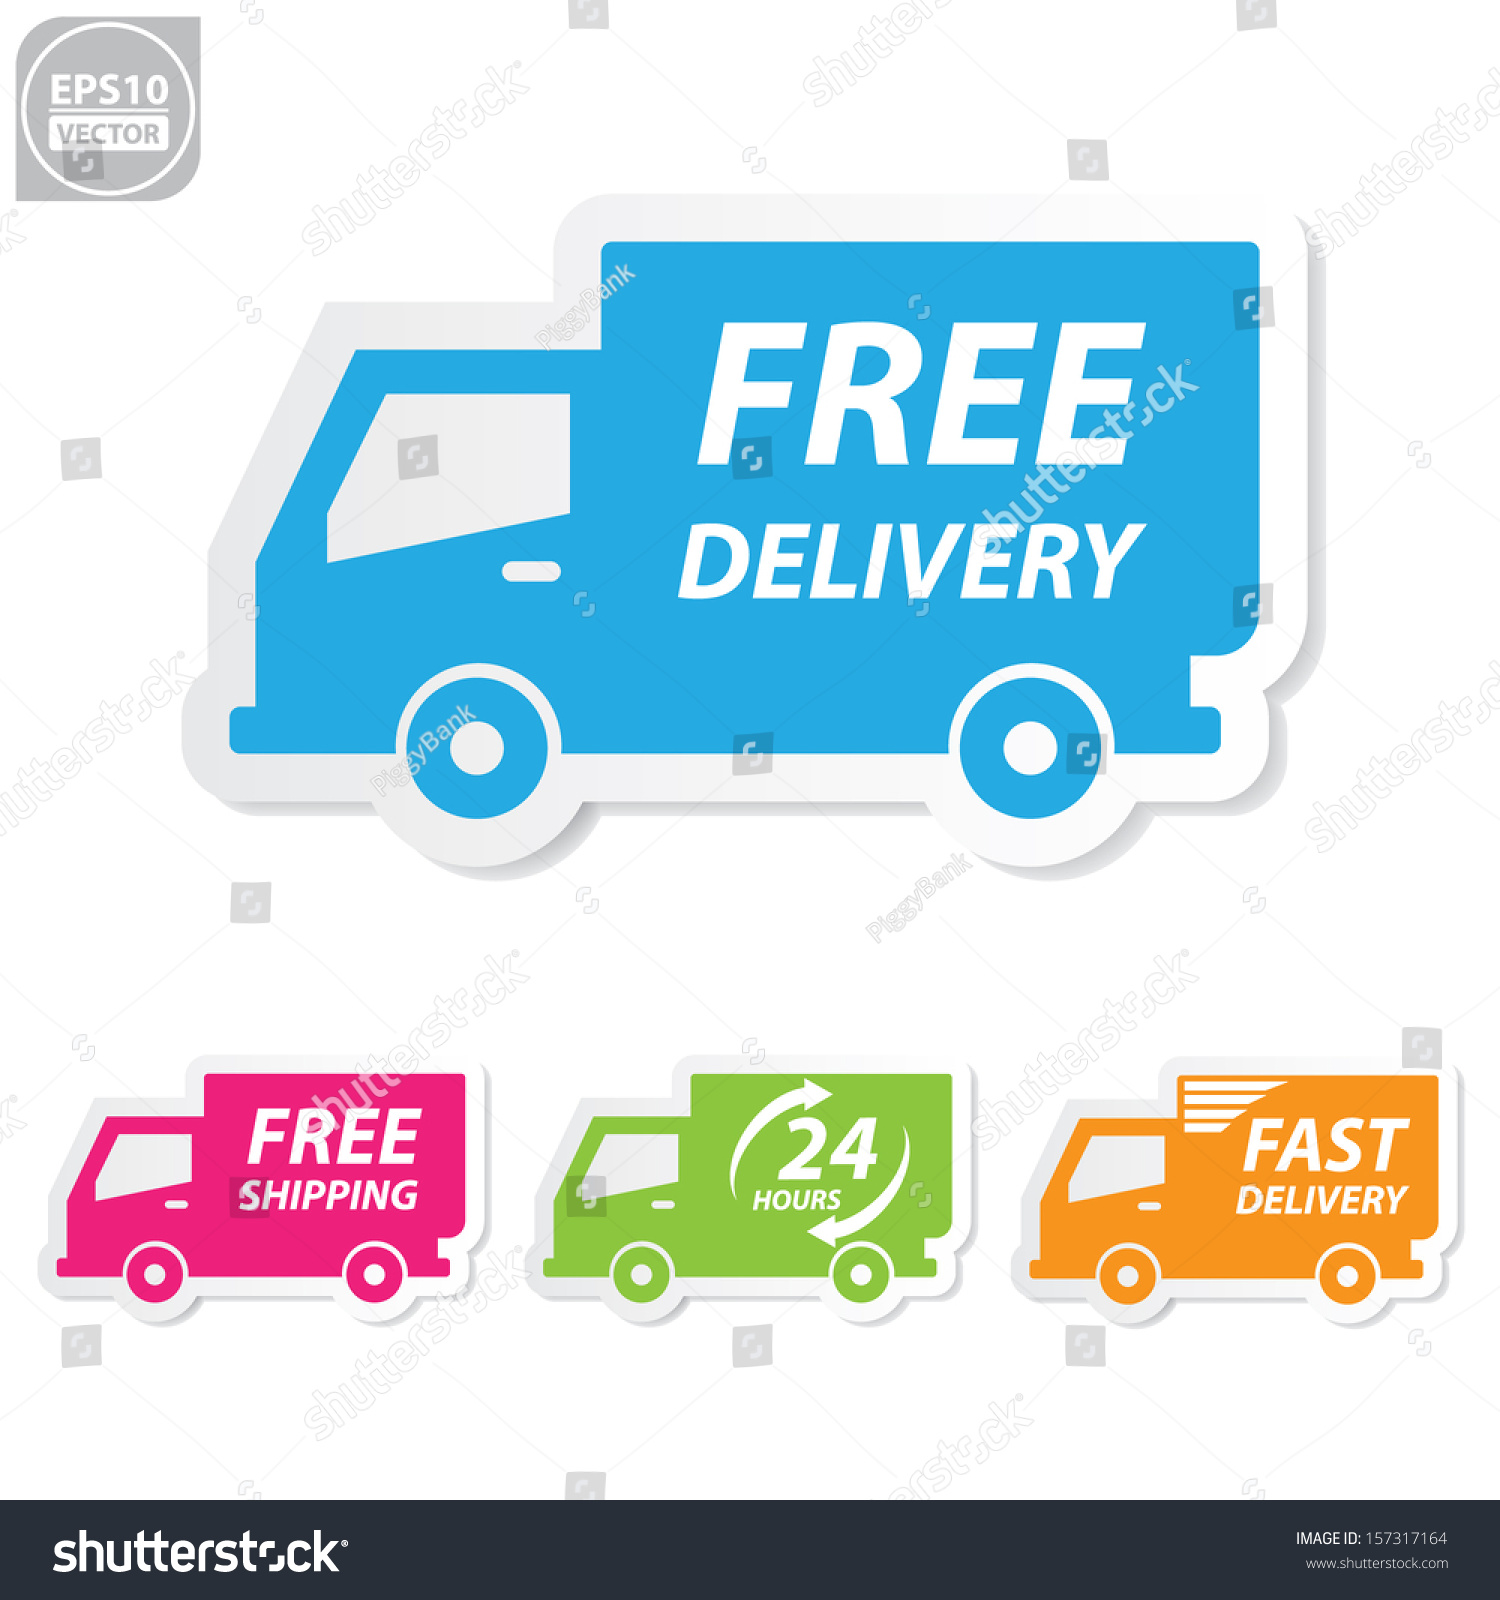 Vector:Free Delivery, Free Shipping, 24 Hour And Fast Delivery Icons ...